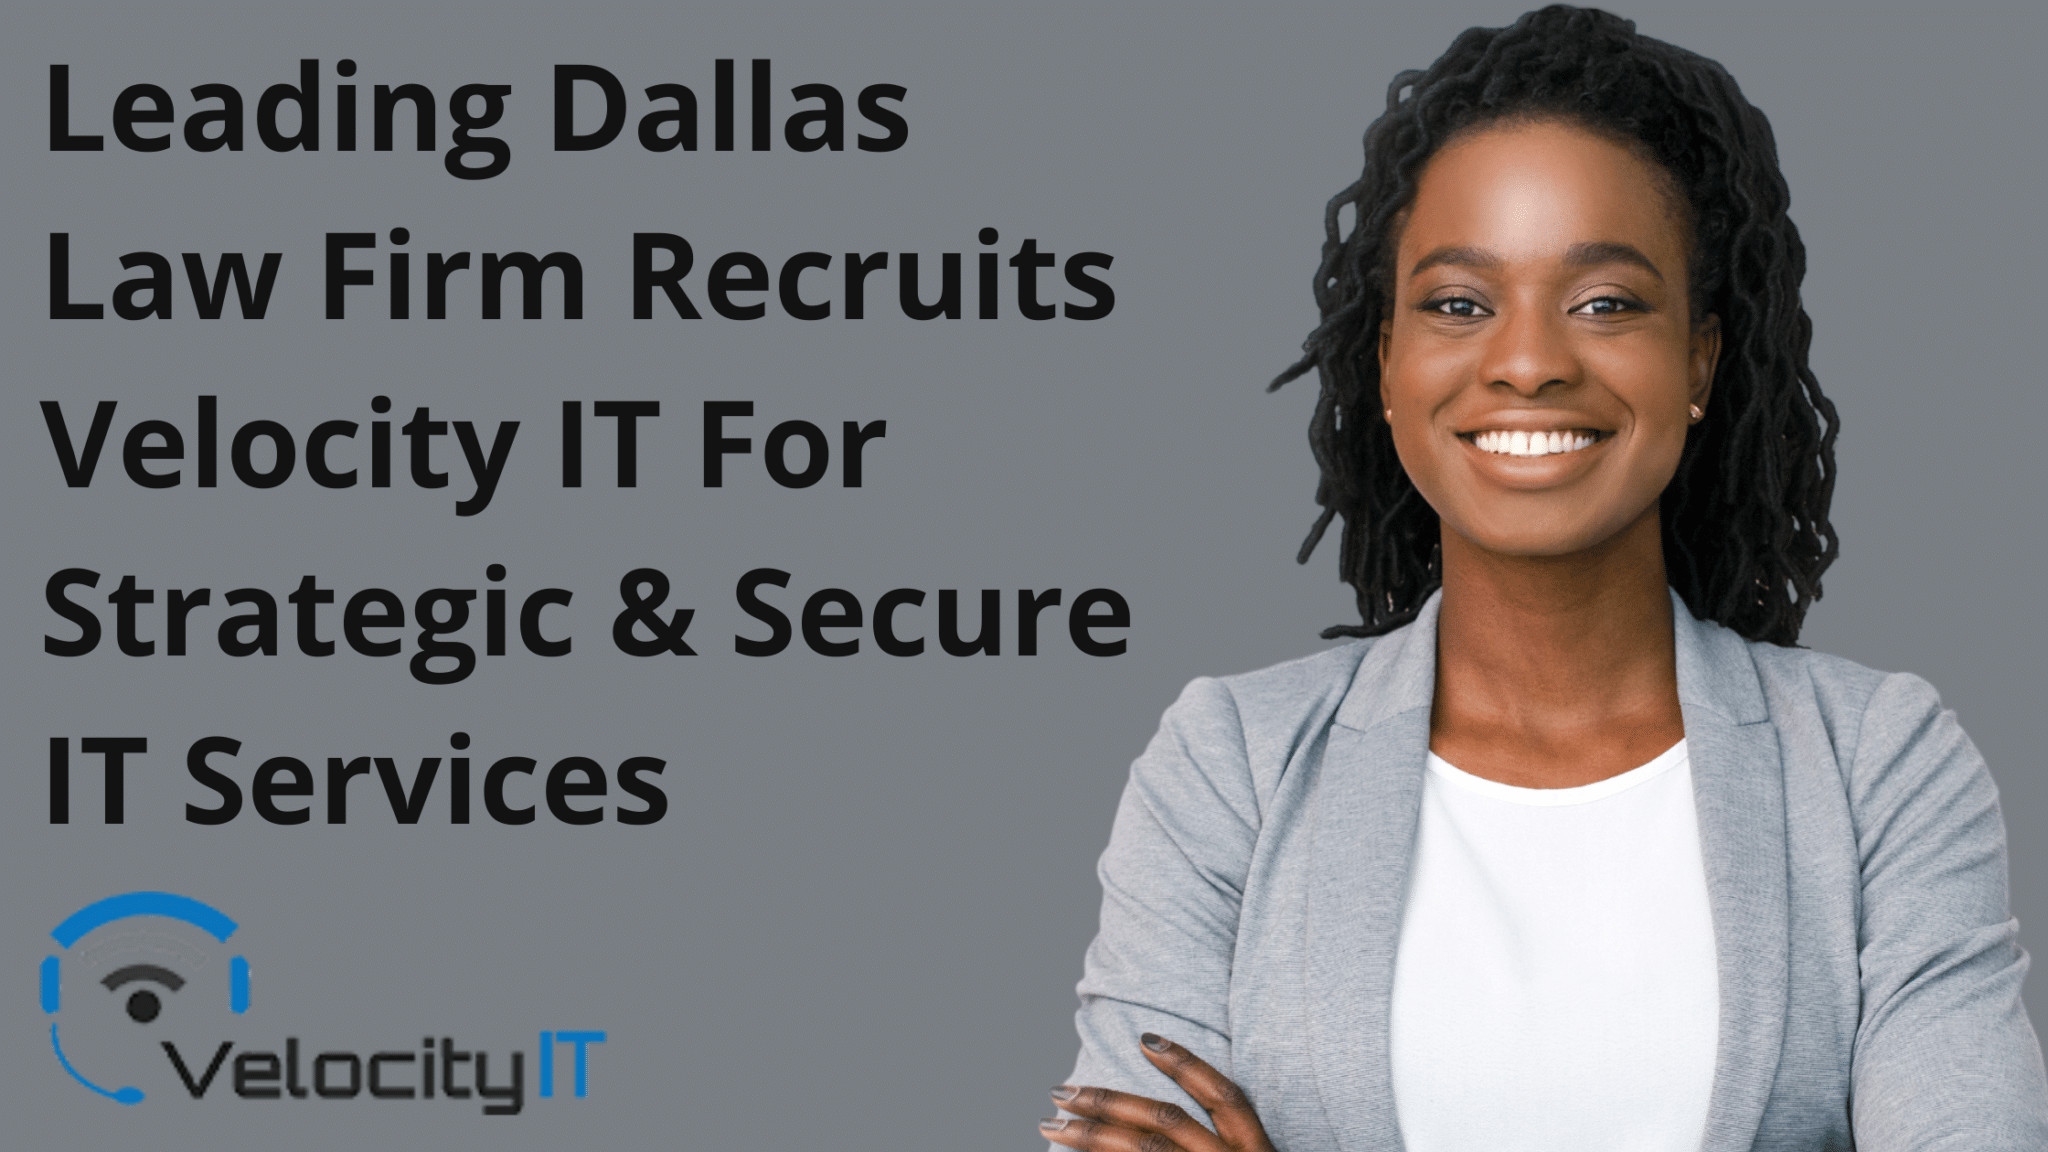 Leading Dallas Law Firm Recruits Velocity IT For Strategic & Secure IT Services